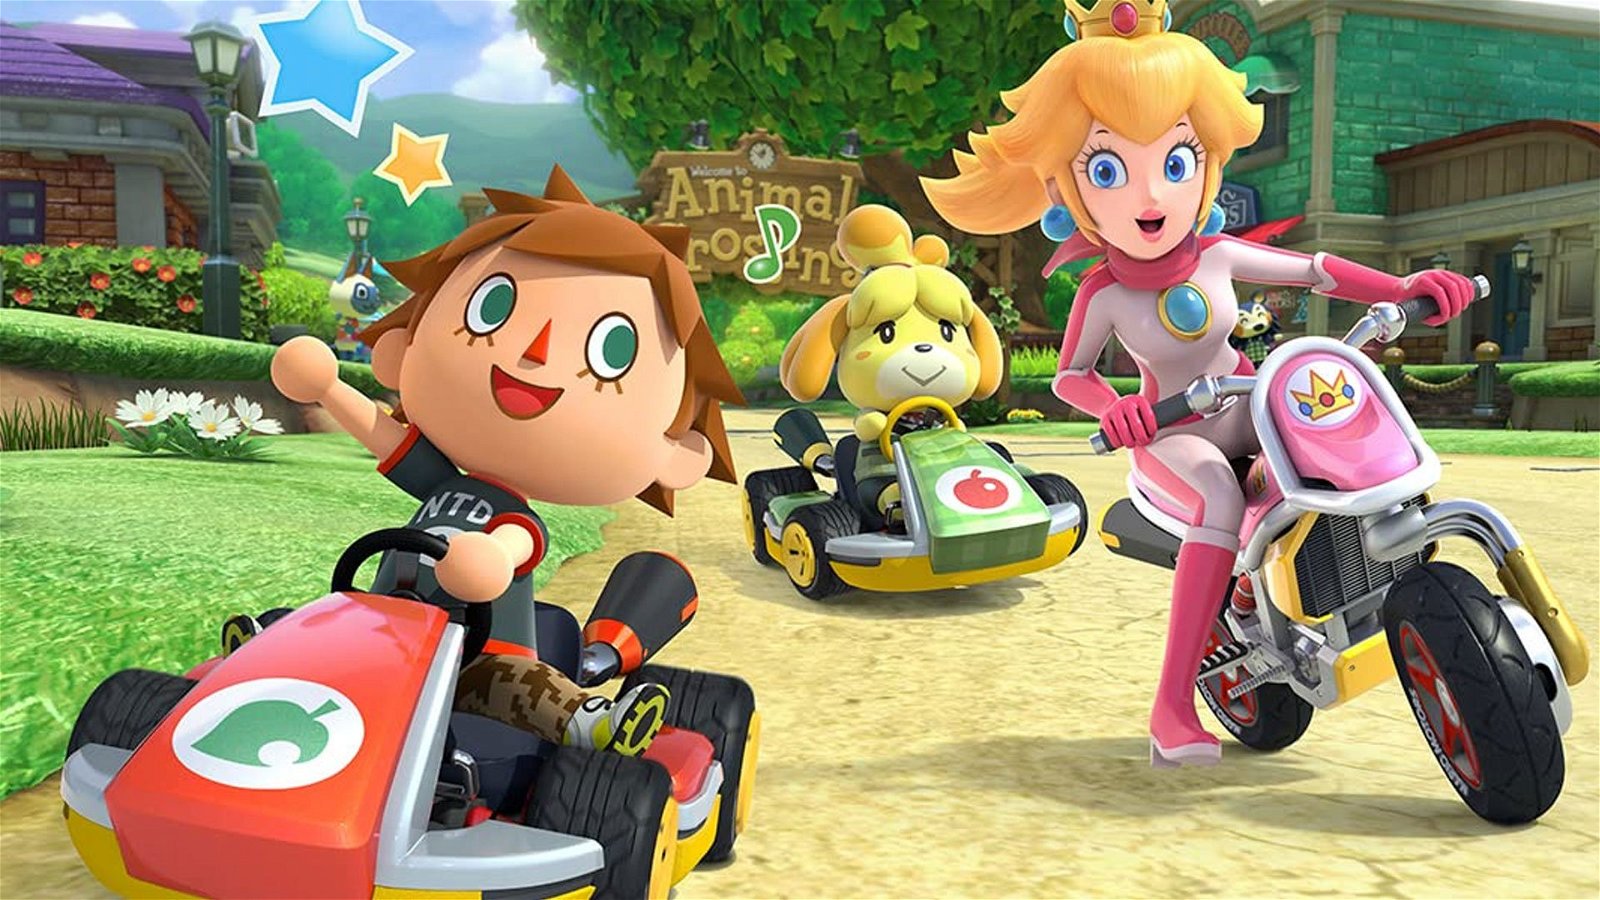 Mario Kart 8 Deluxe's final DLC brings a long-awaited track